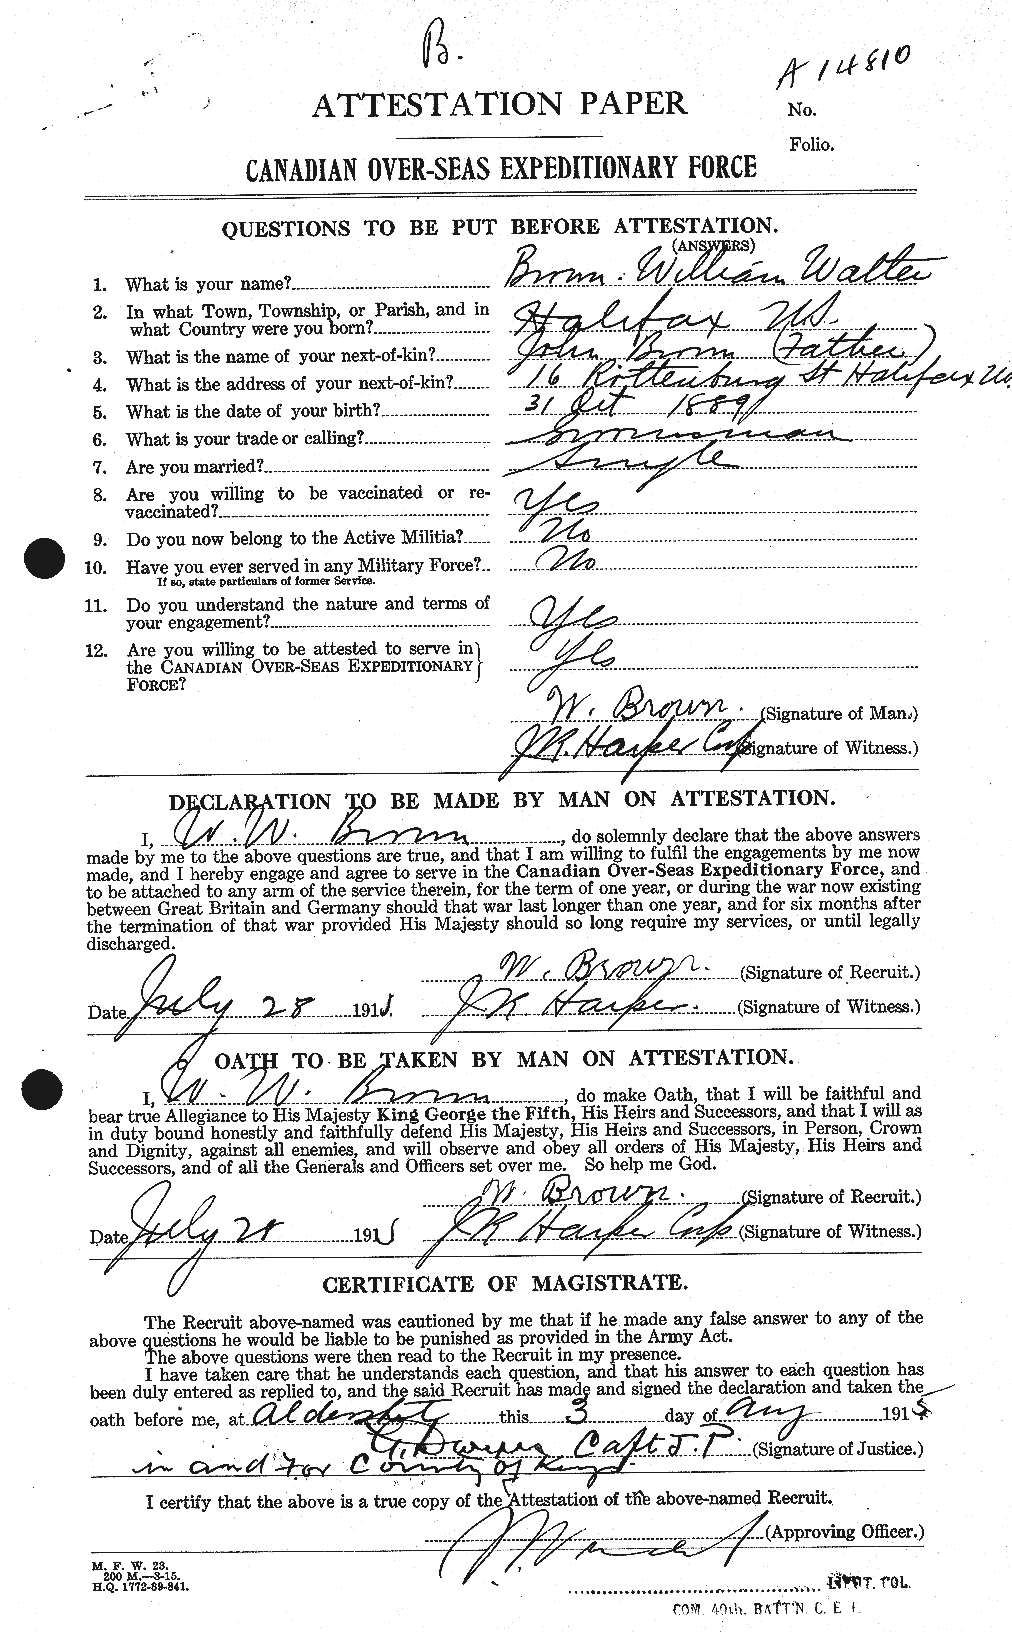 Personnel Records of the First World War - CEF 270899a